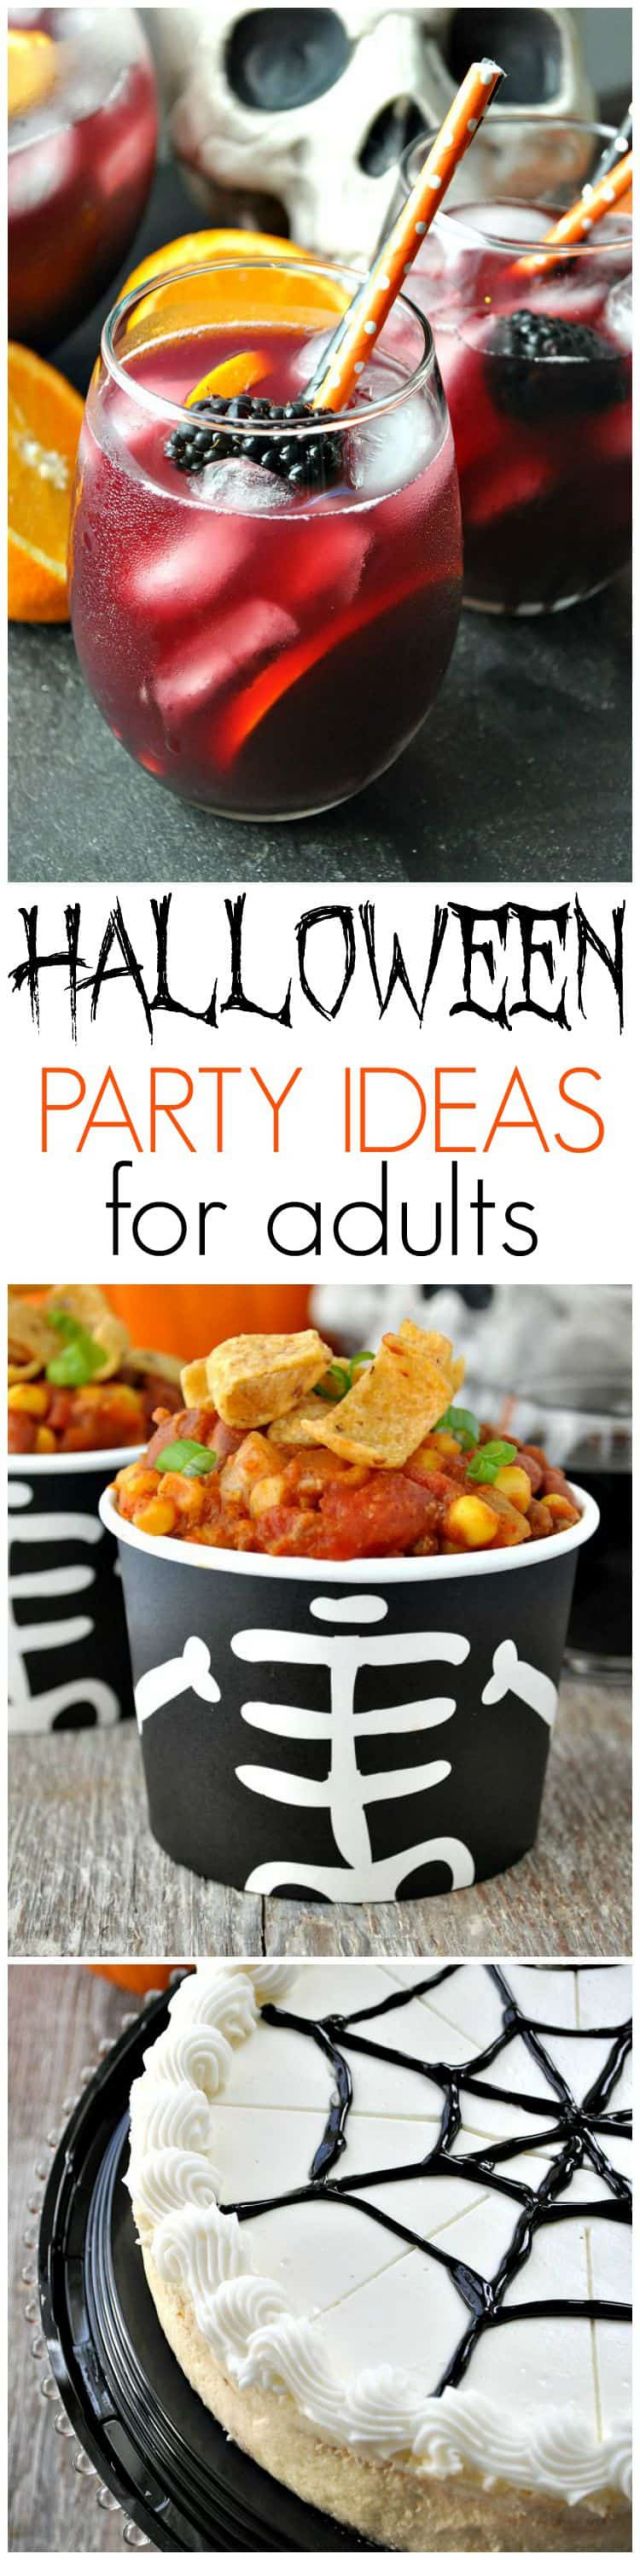 Easy Halloween Party Food Ideas For Adults
 Slow Cooker Pumpkin Chili Halloween Party Ideas for